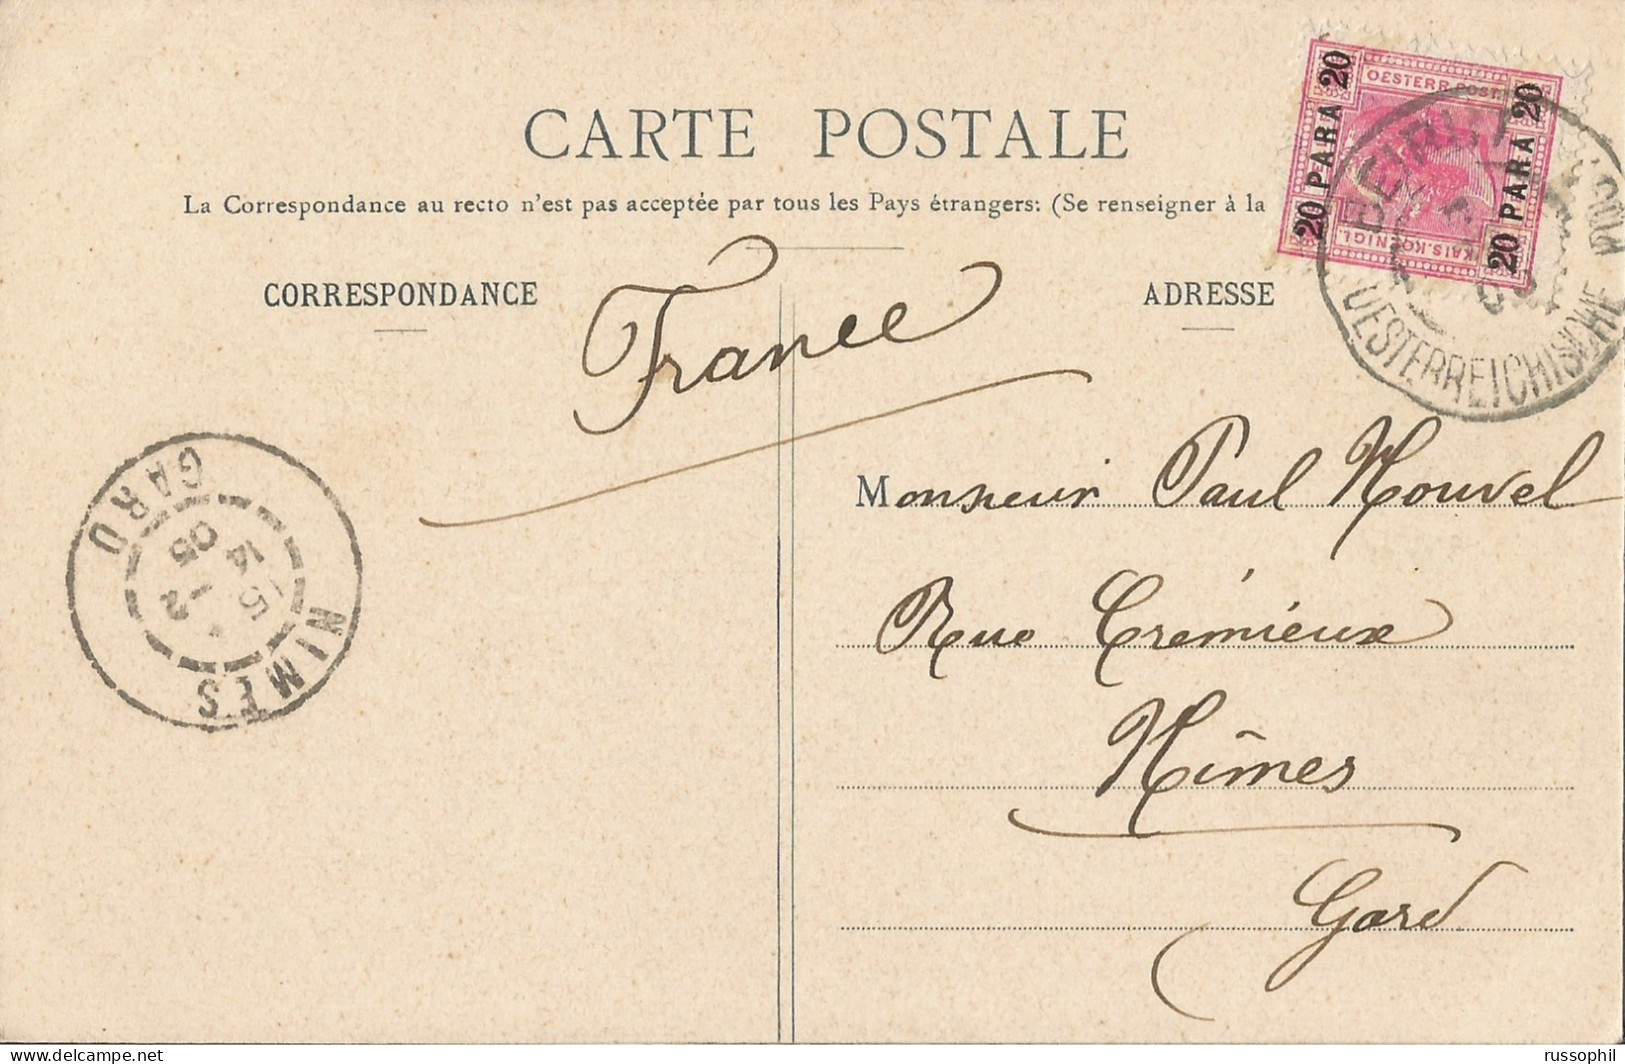 AUSTRIA - OST. POST IN DER LEVANTE - Mi #44 ALONE FRANKING PC (VIEW OF DAMAS) FROM BEIRUT TO FRANCE - 1905 - Levant Autrichien